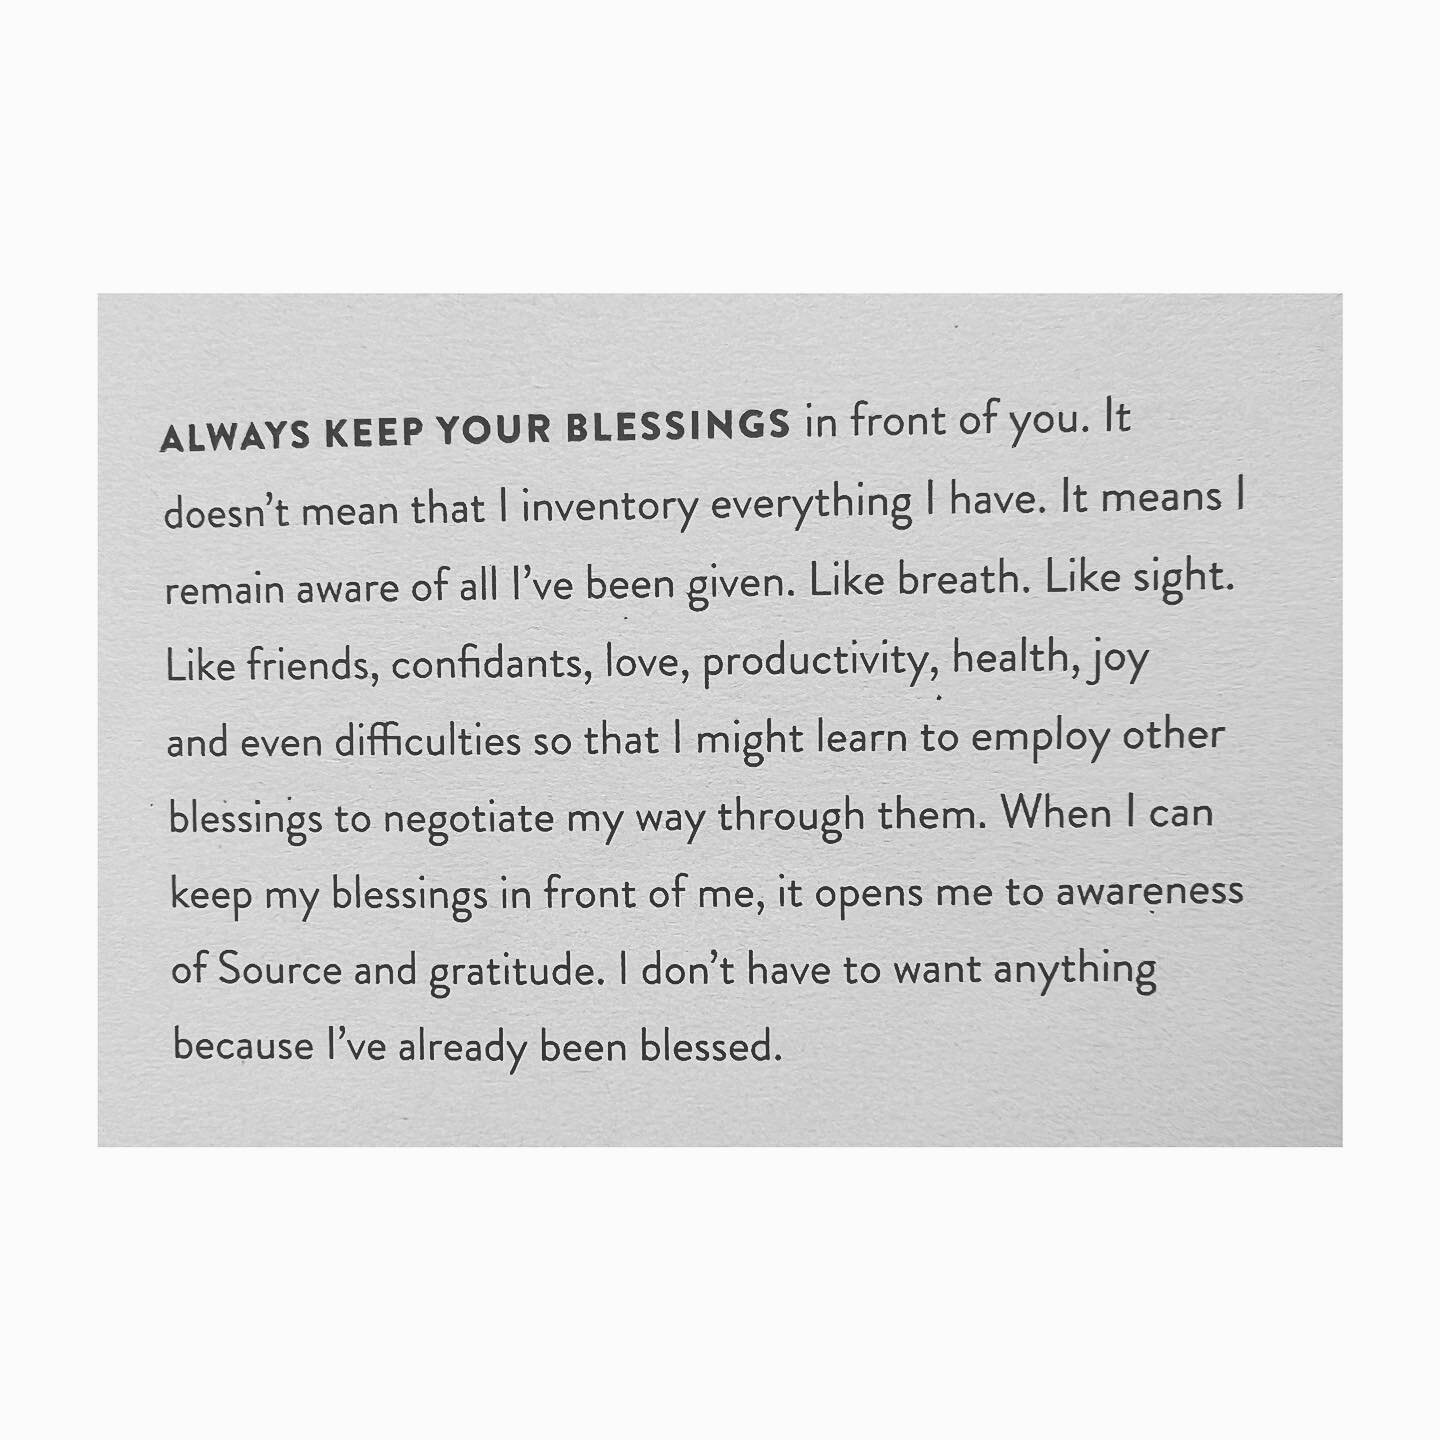 b l e s s i n g s ✨

&ldquo;Always keep your blessings in front of you. It doesn&rsquo;t mean I inventory everything I have.  It means that I remain aware of all I&rsquo;ve been given. like breath, like sight. Like friends, confidants, love, producti